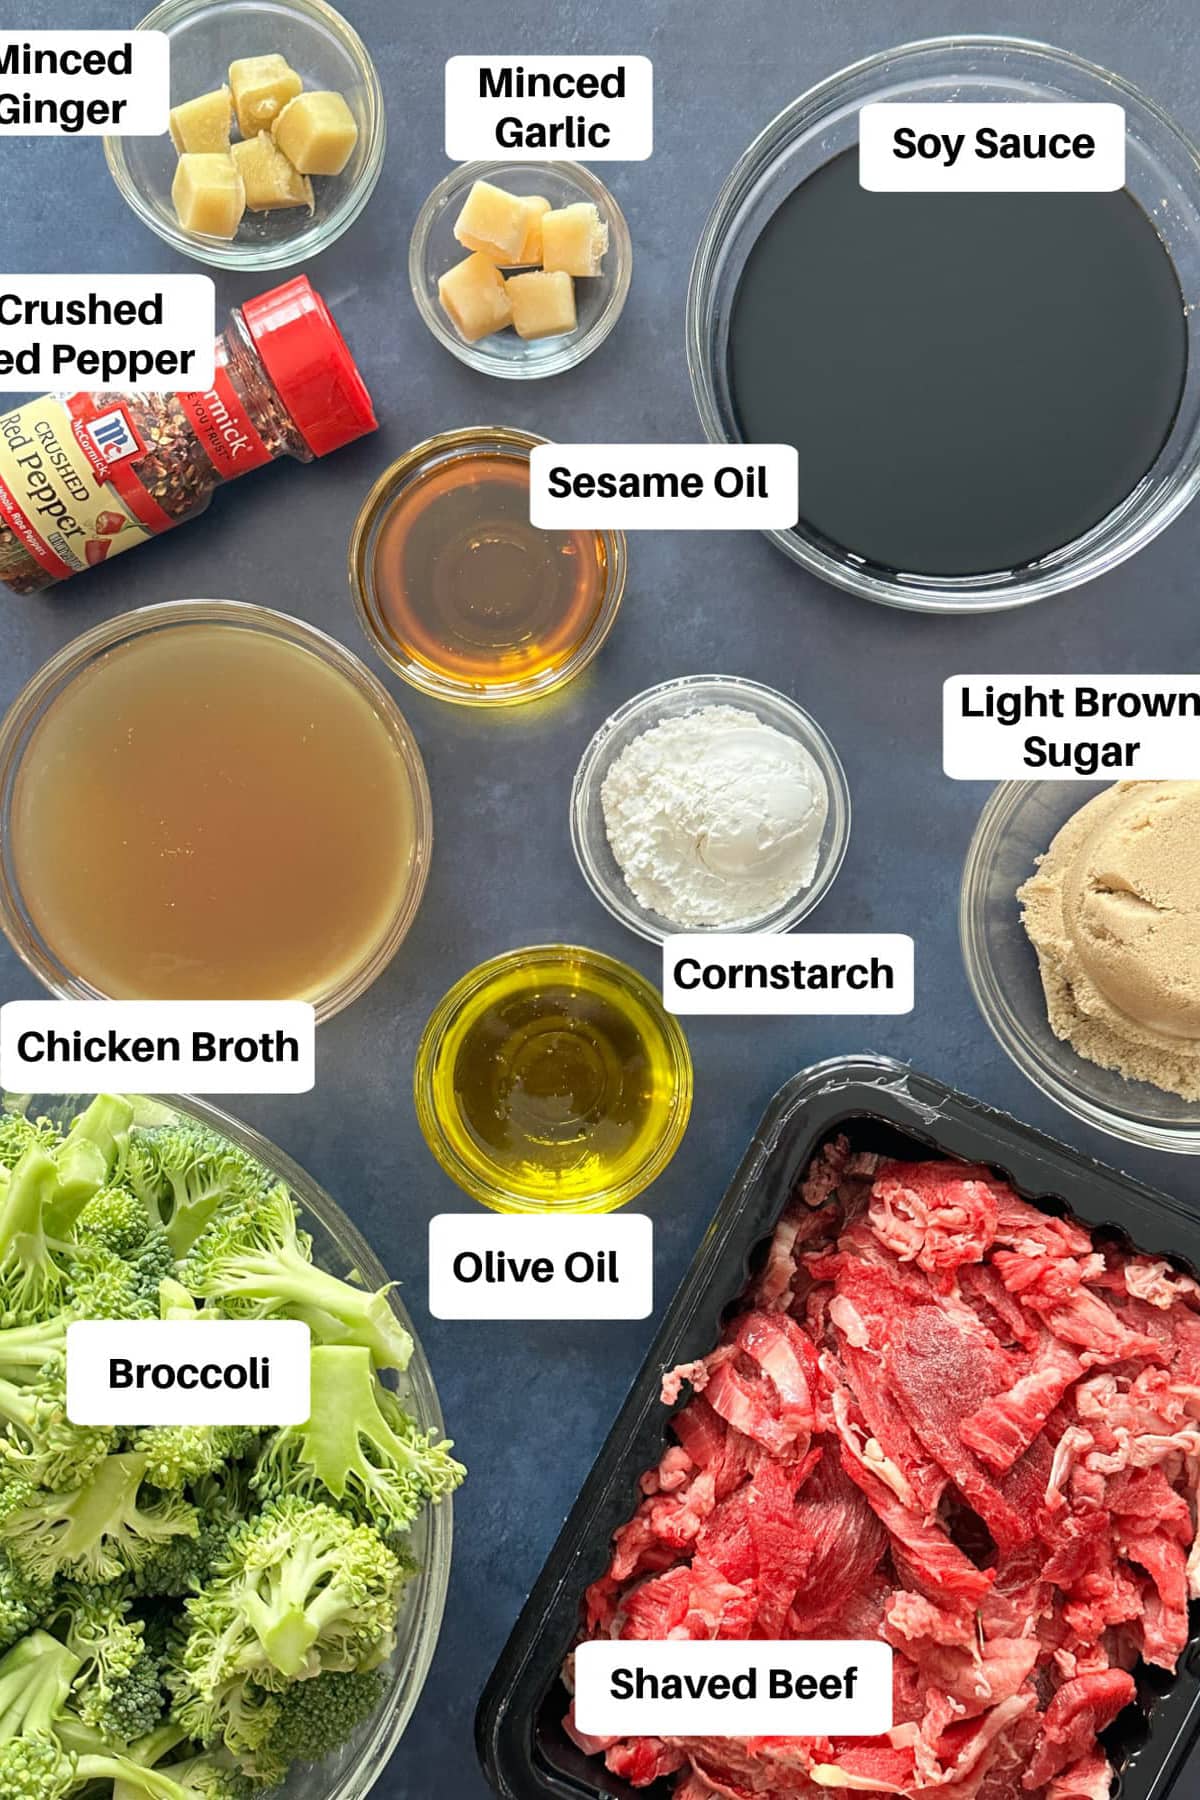 Beef and broccoli ingredients image with text